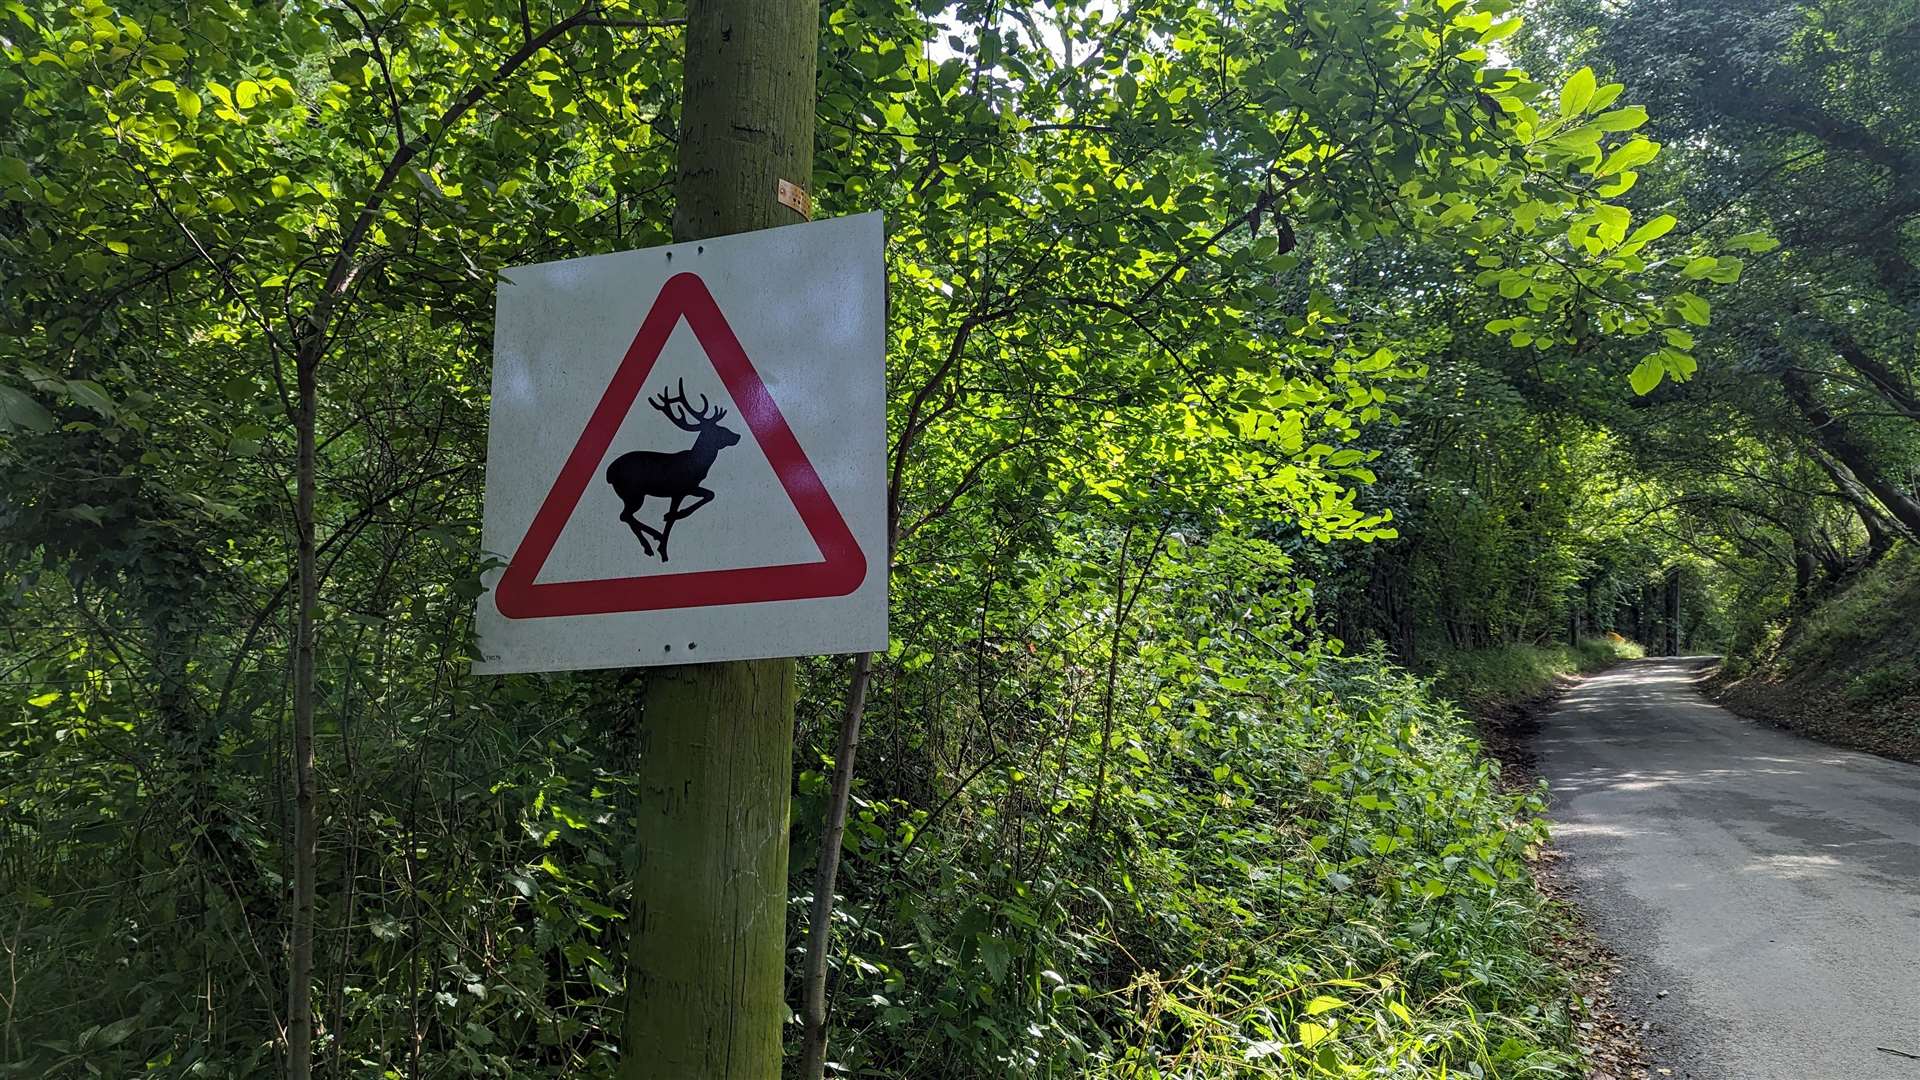 Despite the signs, no deer were spotted during the walk